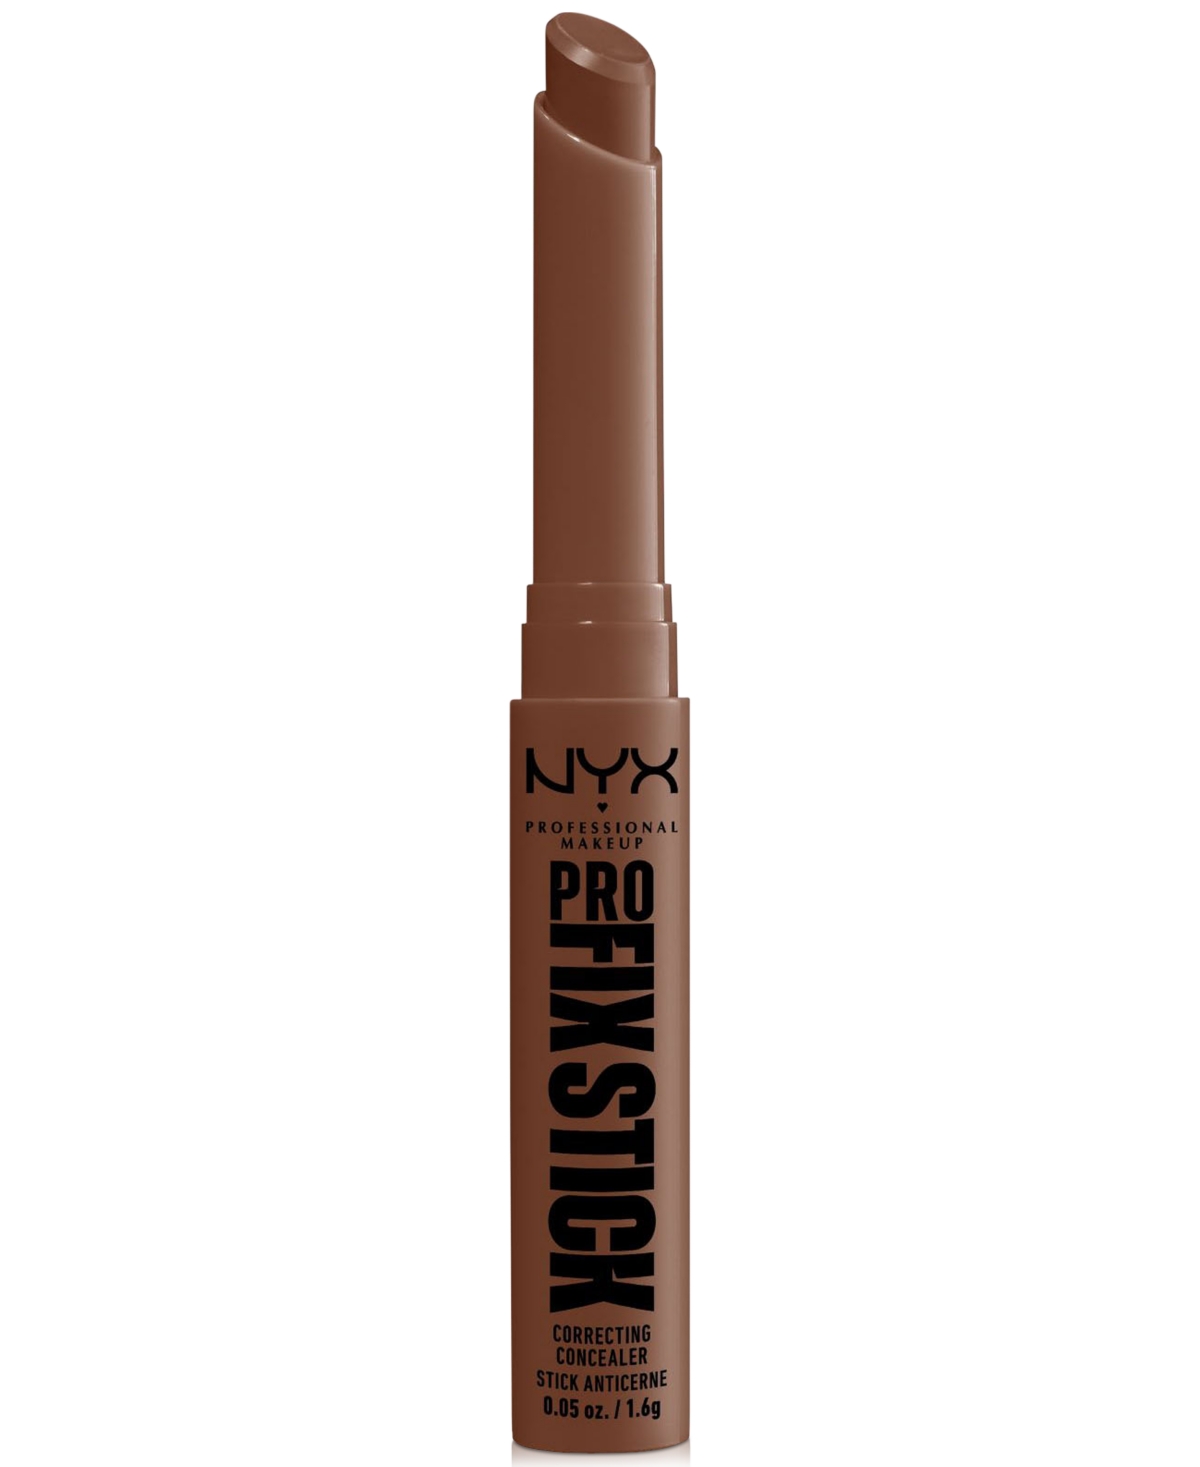 Nyx Professional Makeup Pro Fix Stick Correcting Concealer, 0.05 Oz. In Cocoa